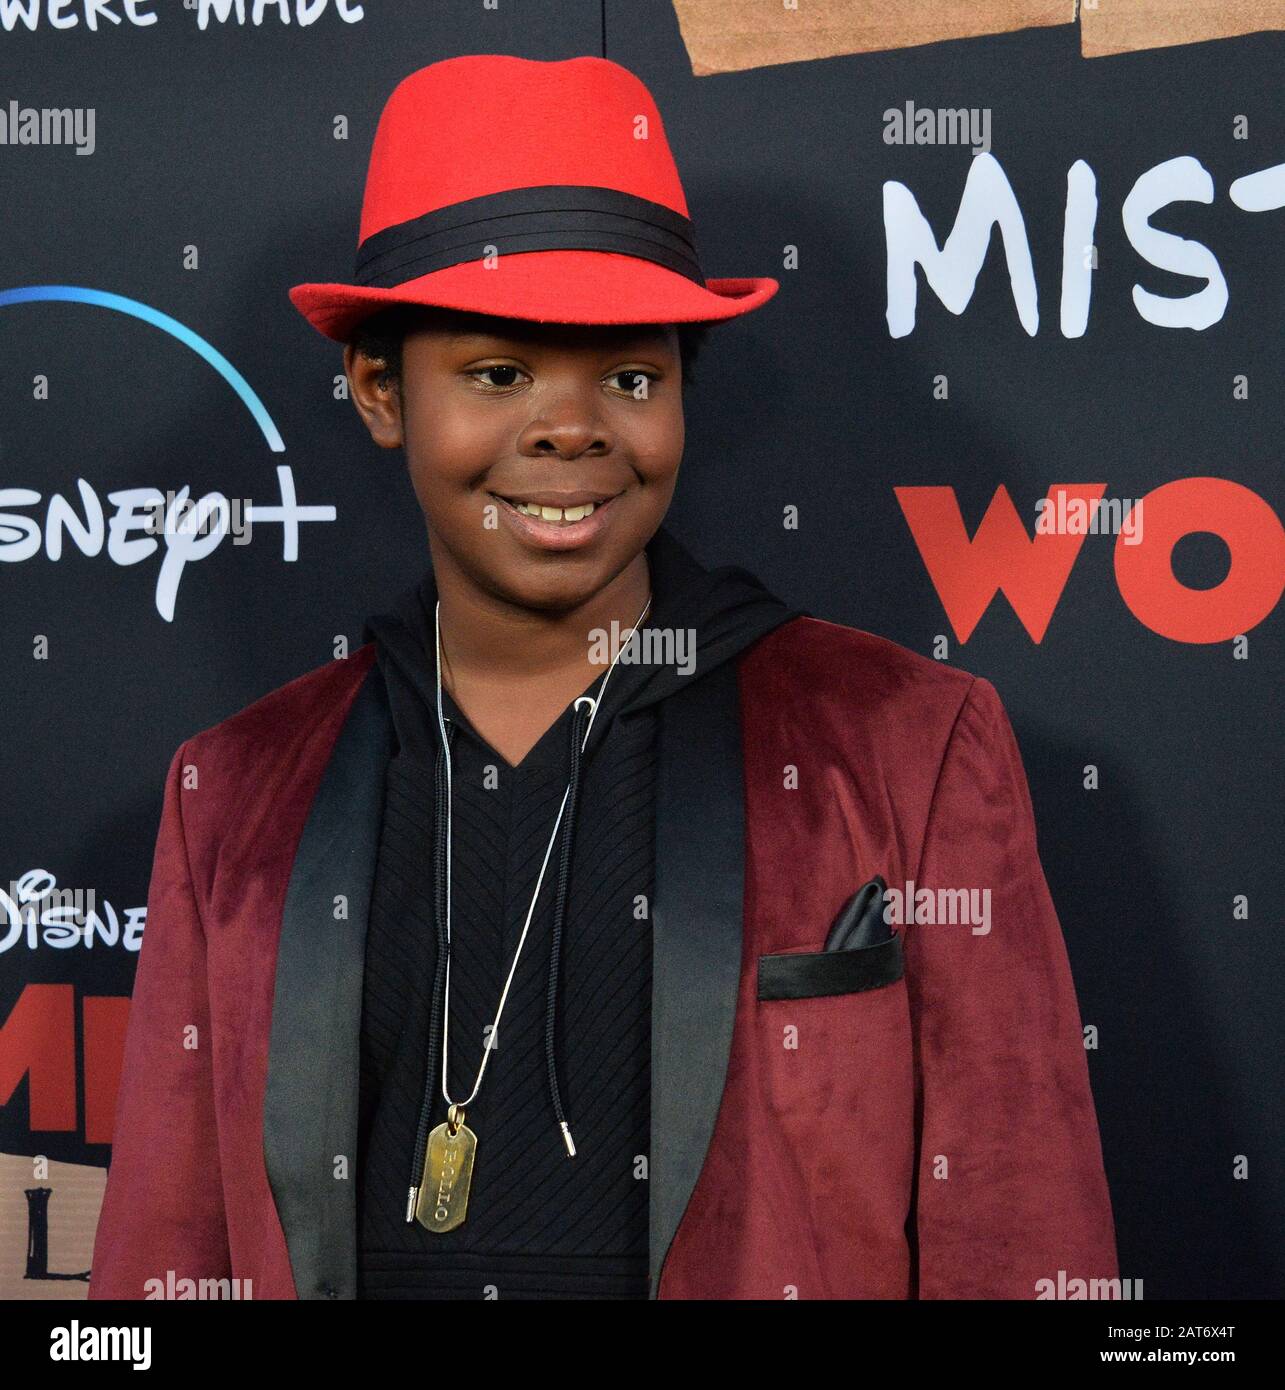 Los Angeles, United States. 31st Jan, 2020. Cast member Kei attends the premiere of the motion picture dramatic fantasy 'Timmy Failure: Mistakes Were Made' at the El Capitan Theatre in the Hollywood section of Los Angeles on Thursday, January 30, 2020. Storyline: Based on the best-selling book of the same name, the film follows the hilarious exploits of quirky, deadpan hero, Timmy Failure, who, along with his 1,500-pound polar bear partner operates Total Failure Inc., a Portland detective agency. Photo by Jim Ruymen/UPI Credit: UPI/Alamy Live News Stock Photo